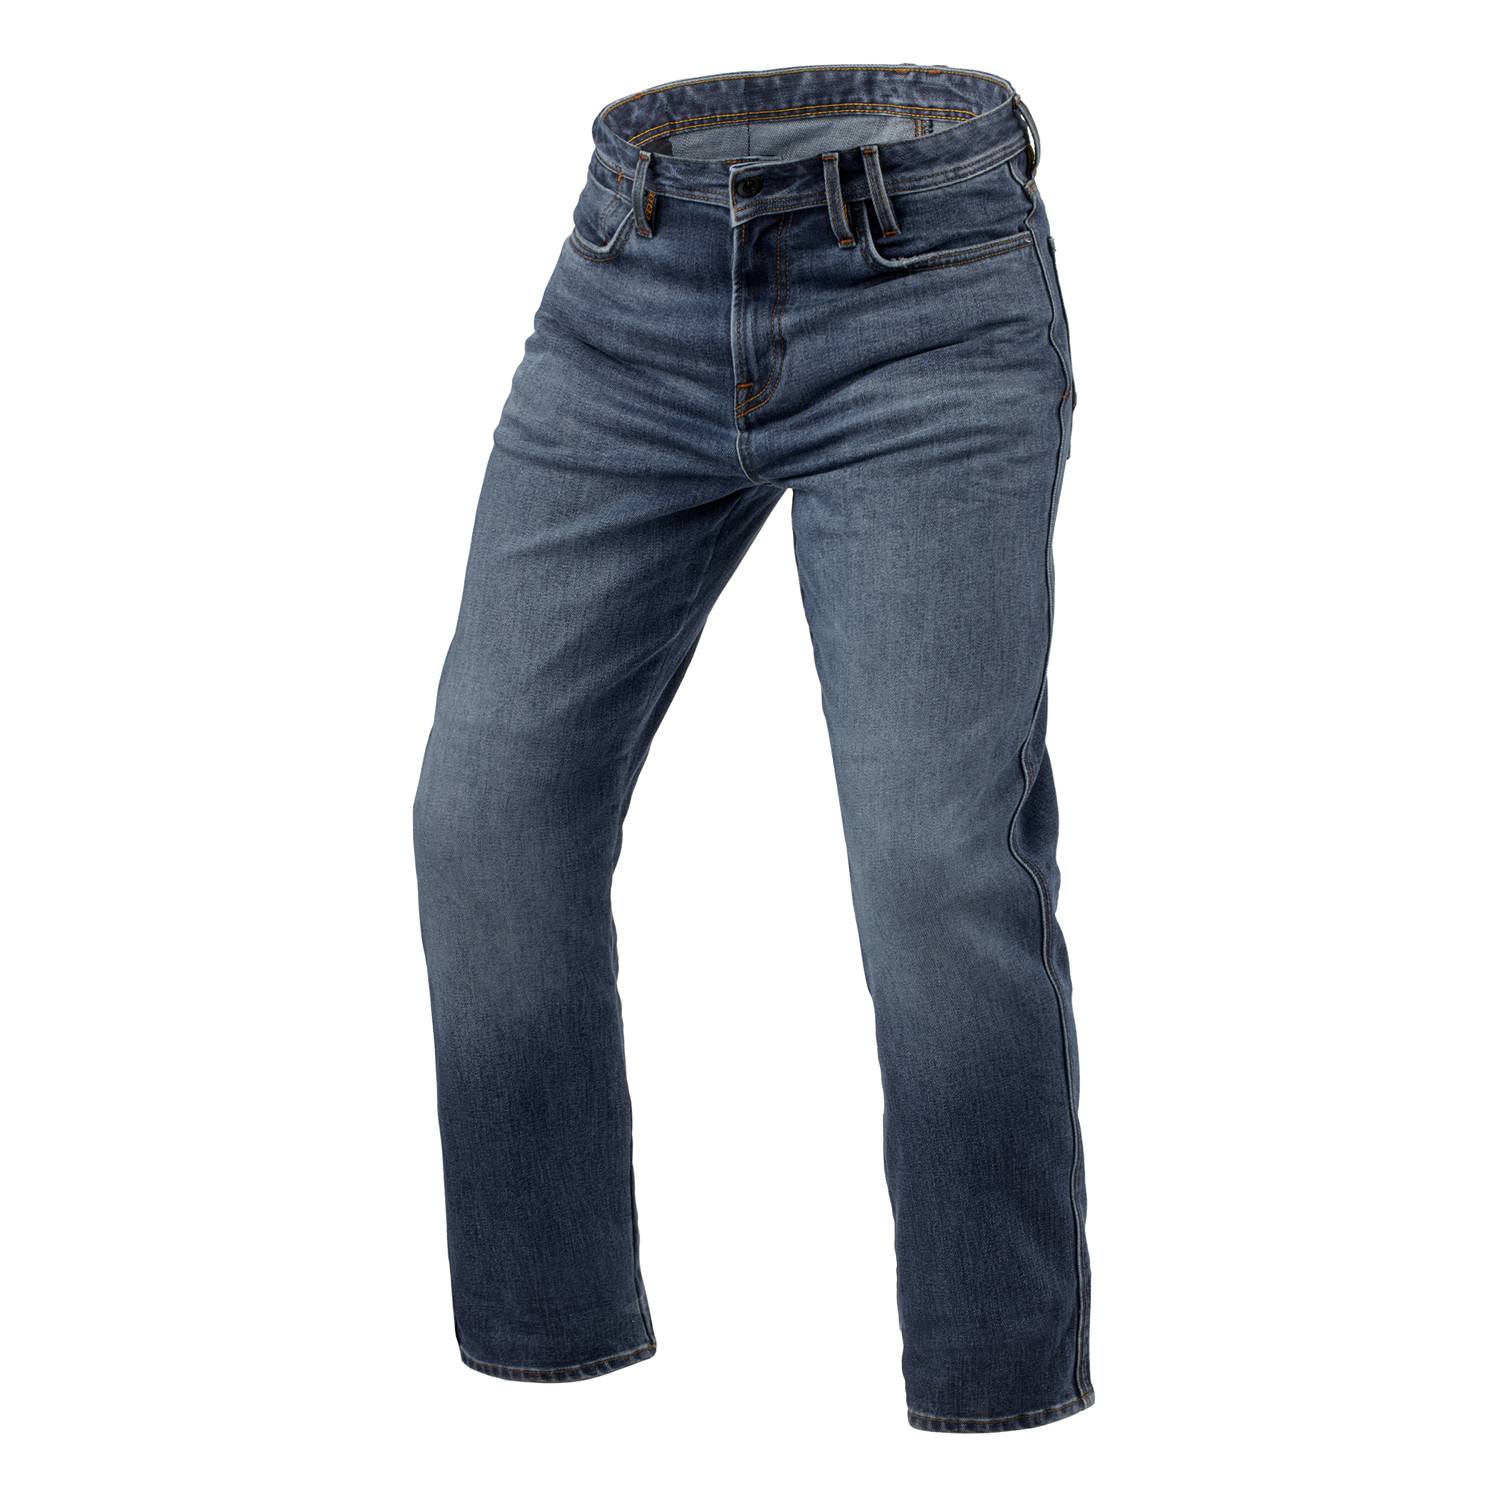 Image of EU REV'IT! Jeans Lombard 3 RF Mid Blue Stone L32 Motorcycle Jeans Taille L32/W33